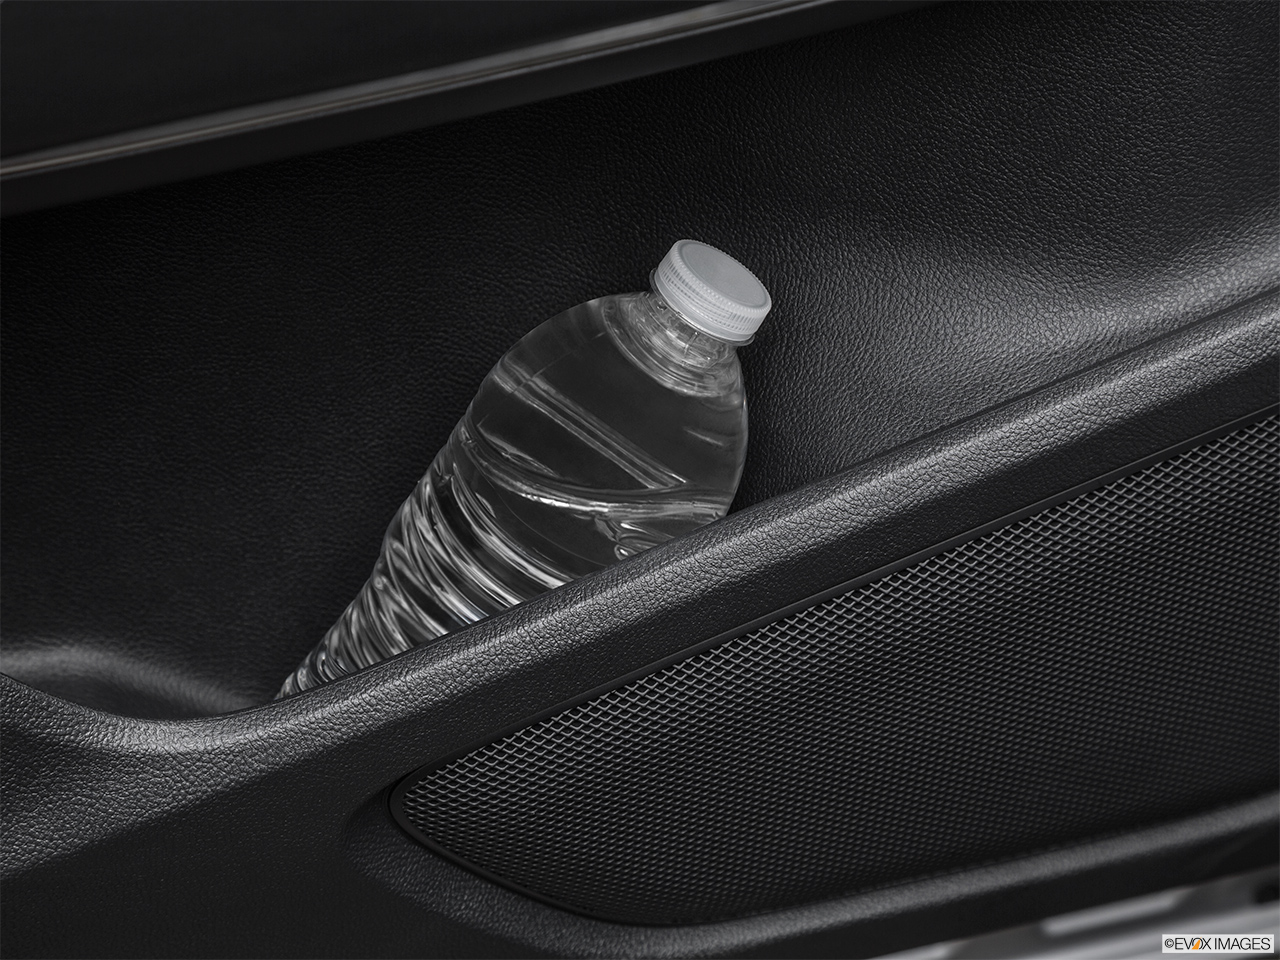 2015 Lincoln MKC Base Cup holder prop (tertiary). 